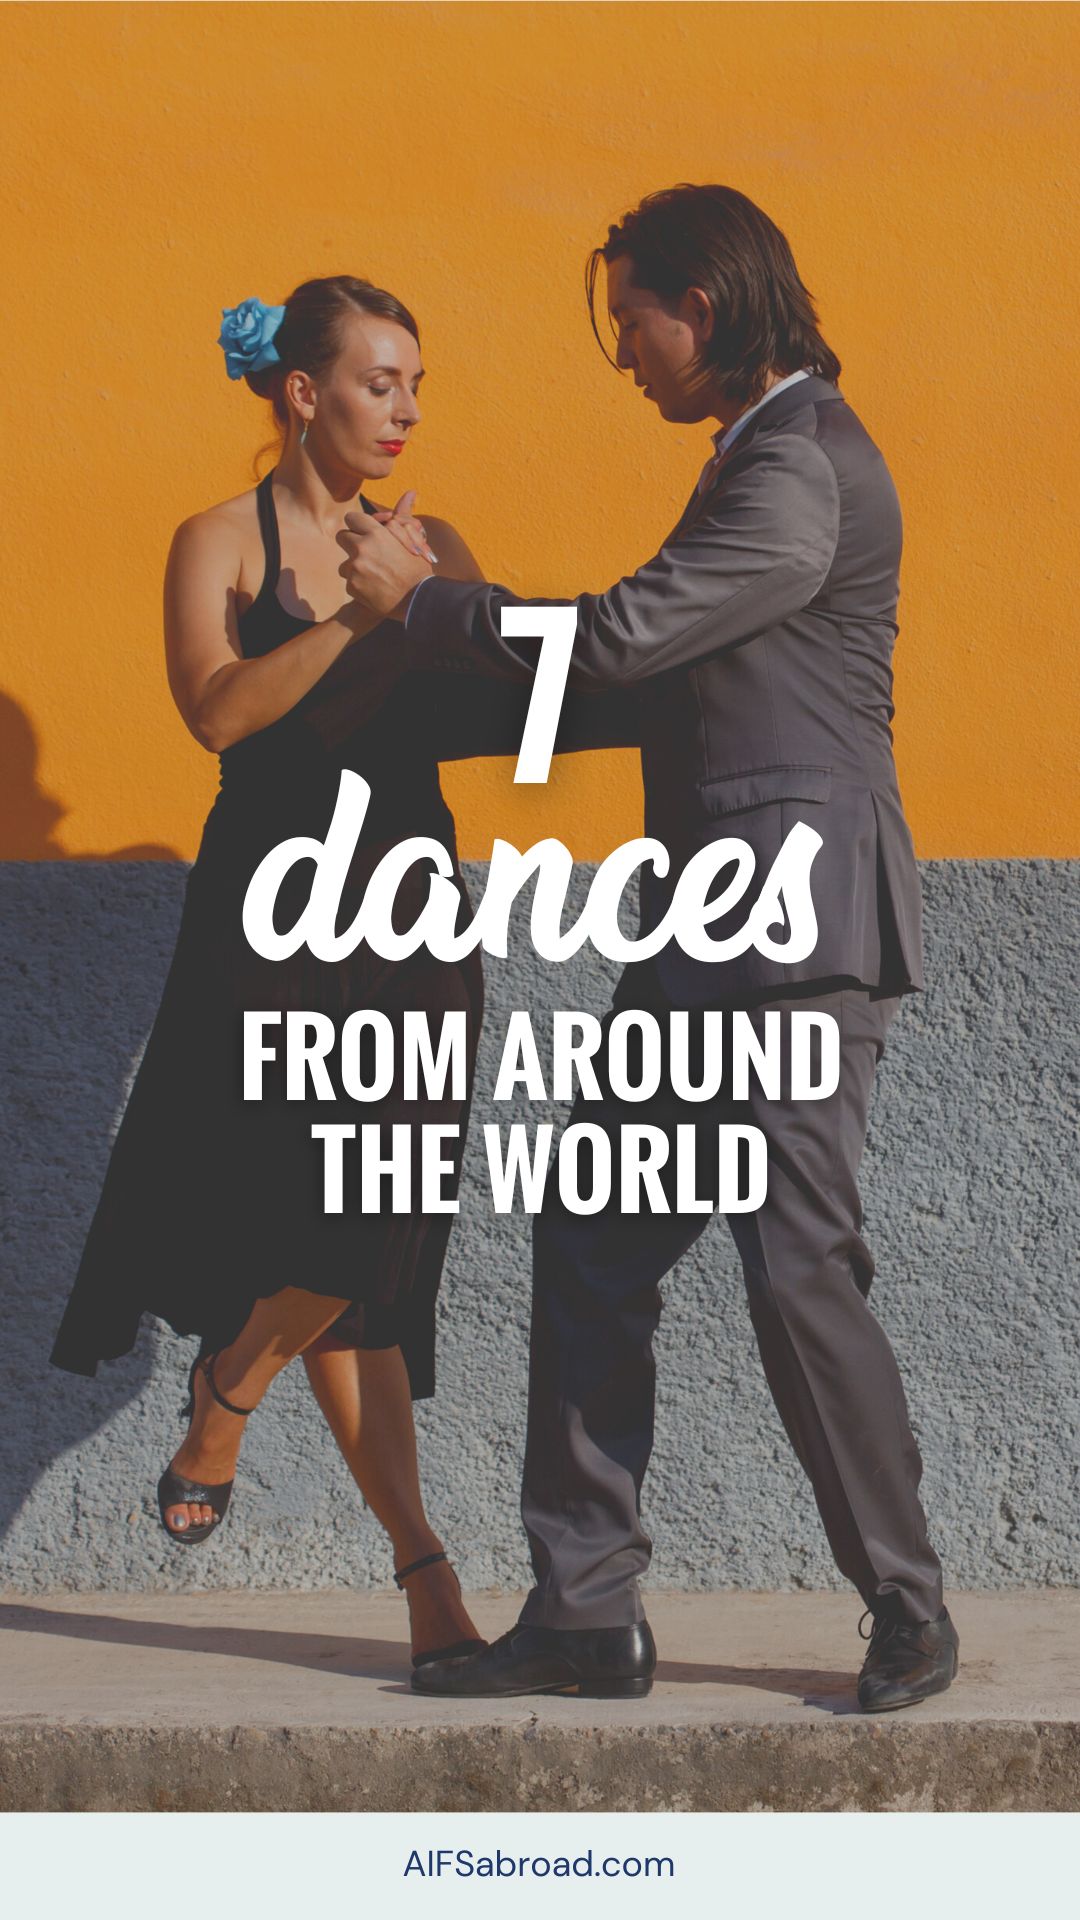 Pin image: Man and woman dancing the Tango in Argentina with text overlay that says "7 days from around the world"